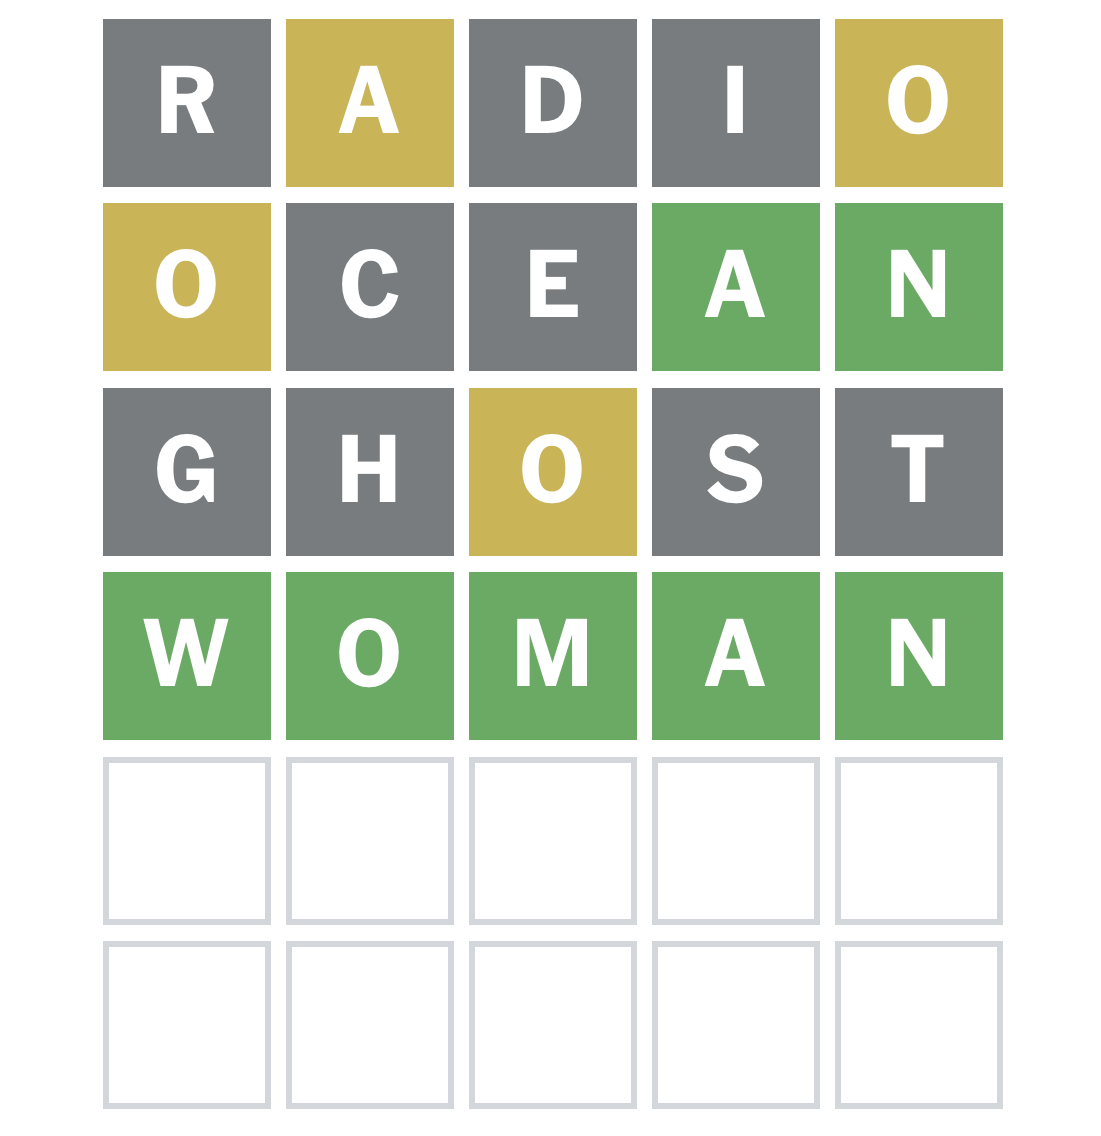 A wordl screenshot with the words: radio, ocean, ghost, woman